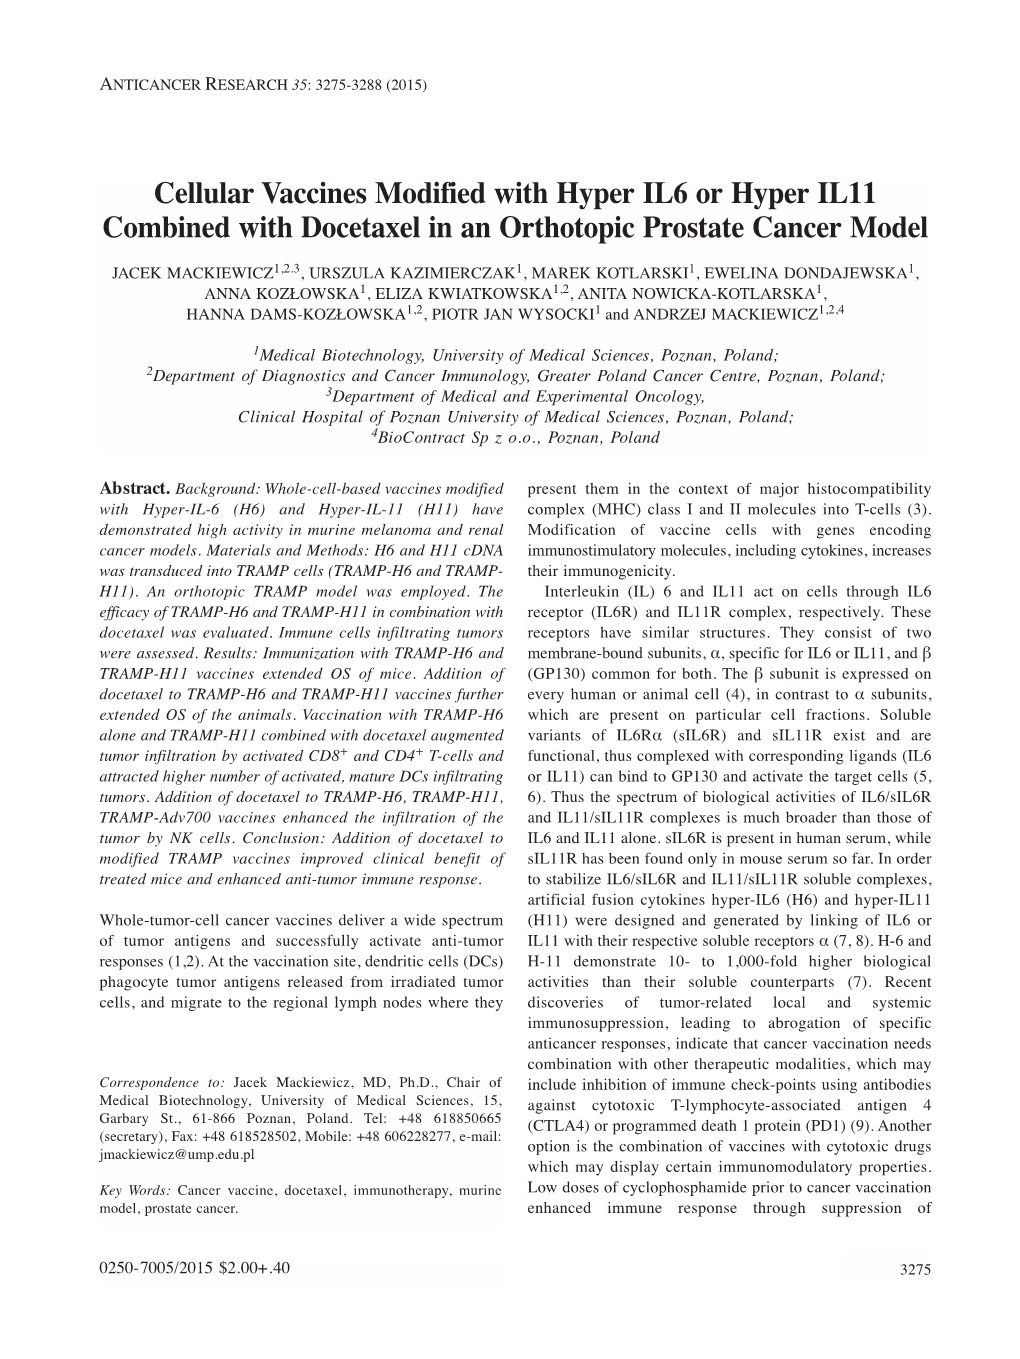 Cellular Vaccines Modified with Hyper IL6 Or Hyper IL11 Combined with Docetaxel in an Orthotopic Prostate Cancer Model